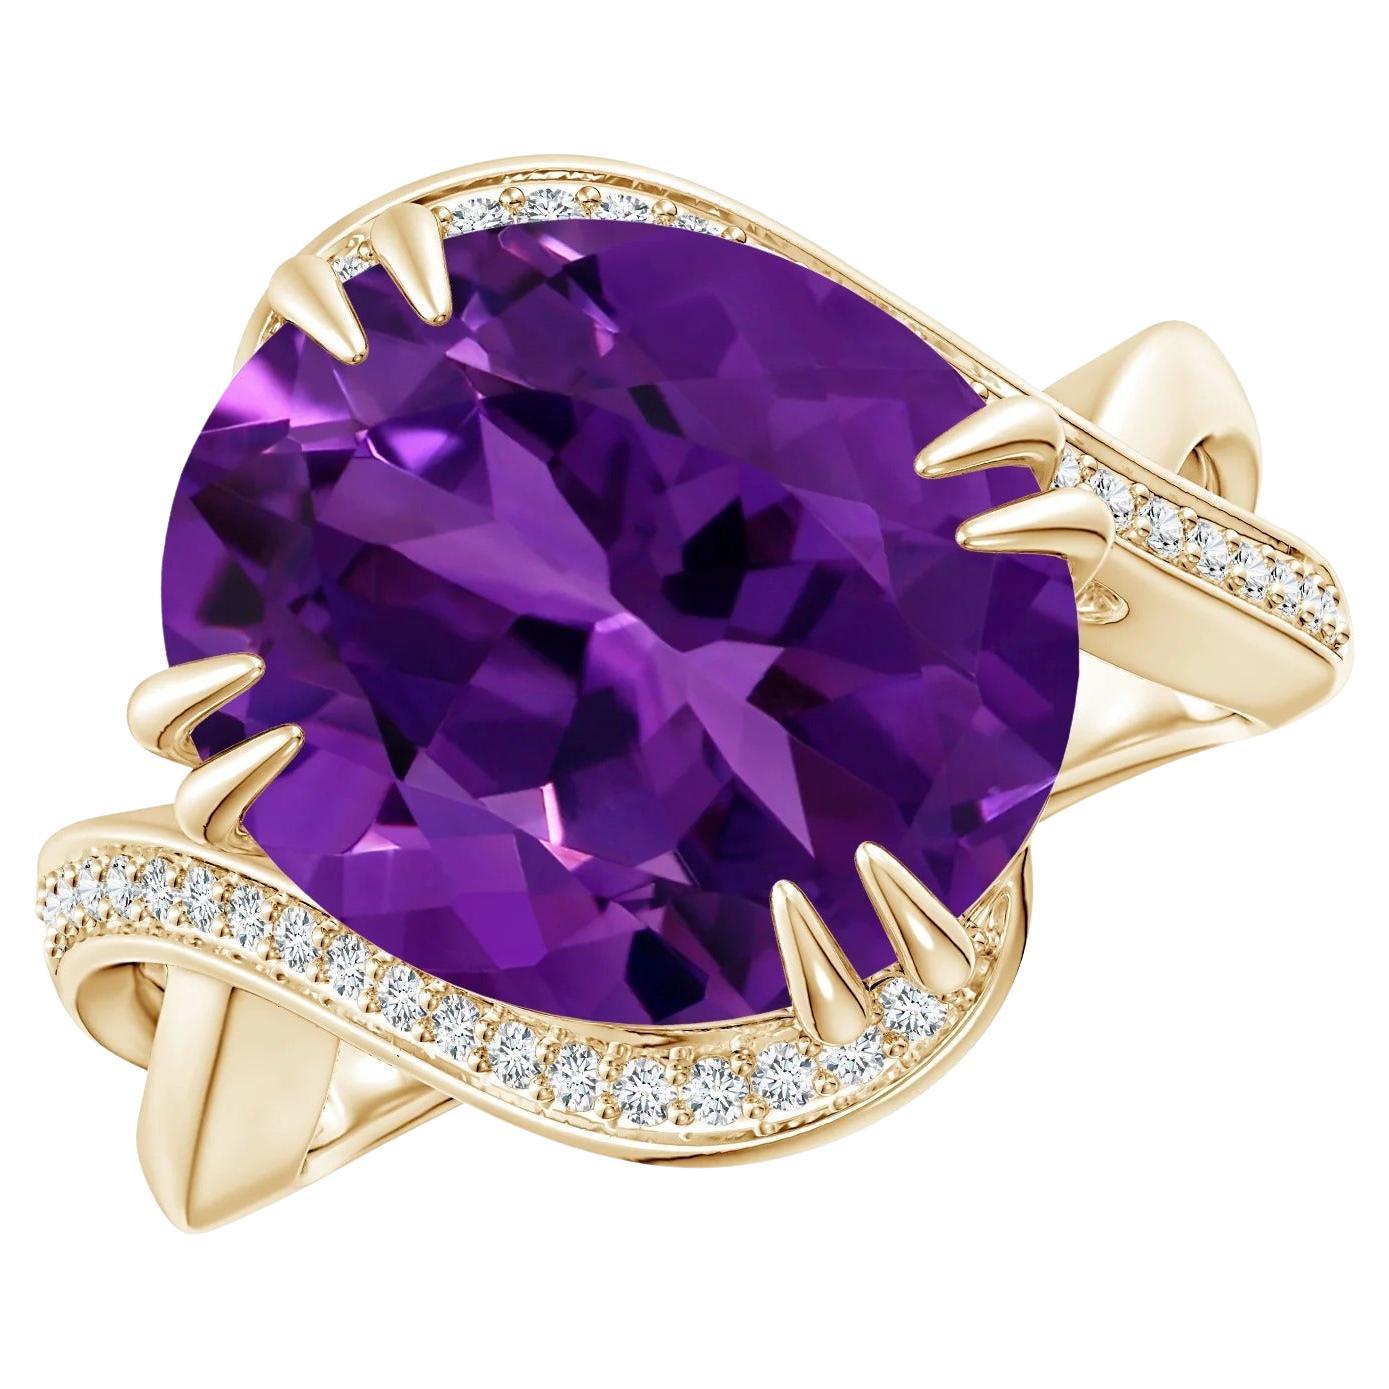 For Sale:  GIA Certified Natural Amethyst Ring in Yellow Gold with Diamond Accents